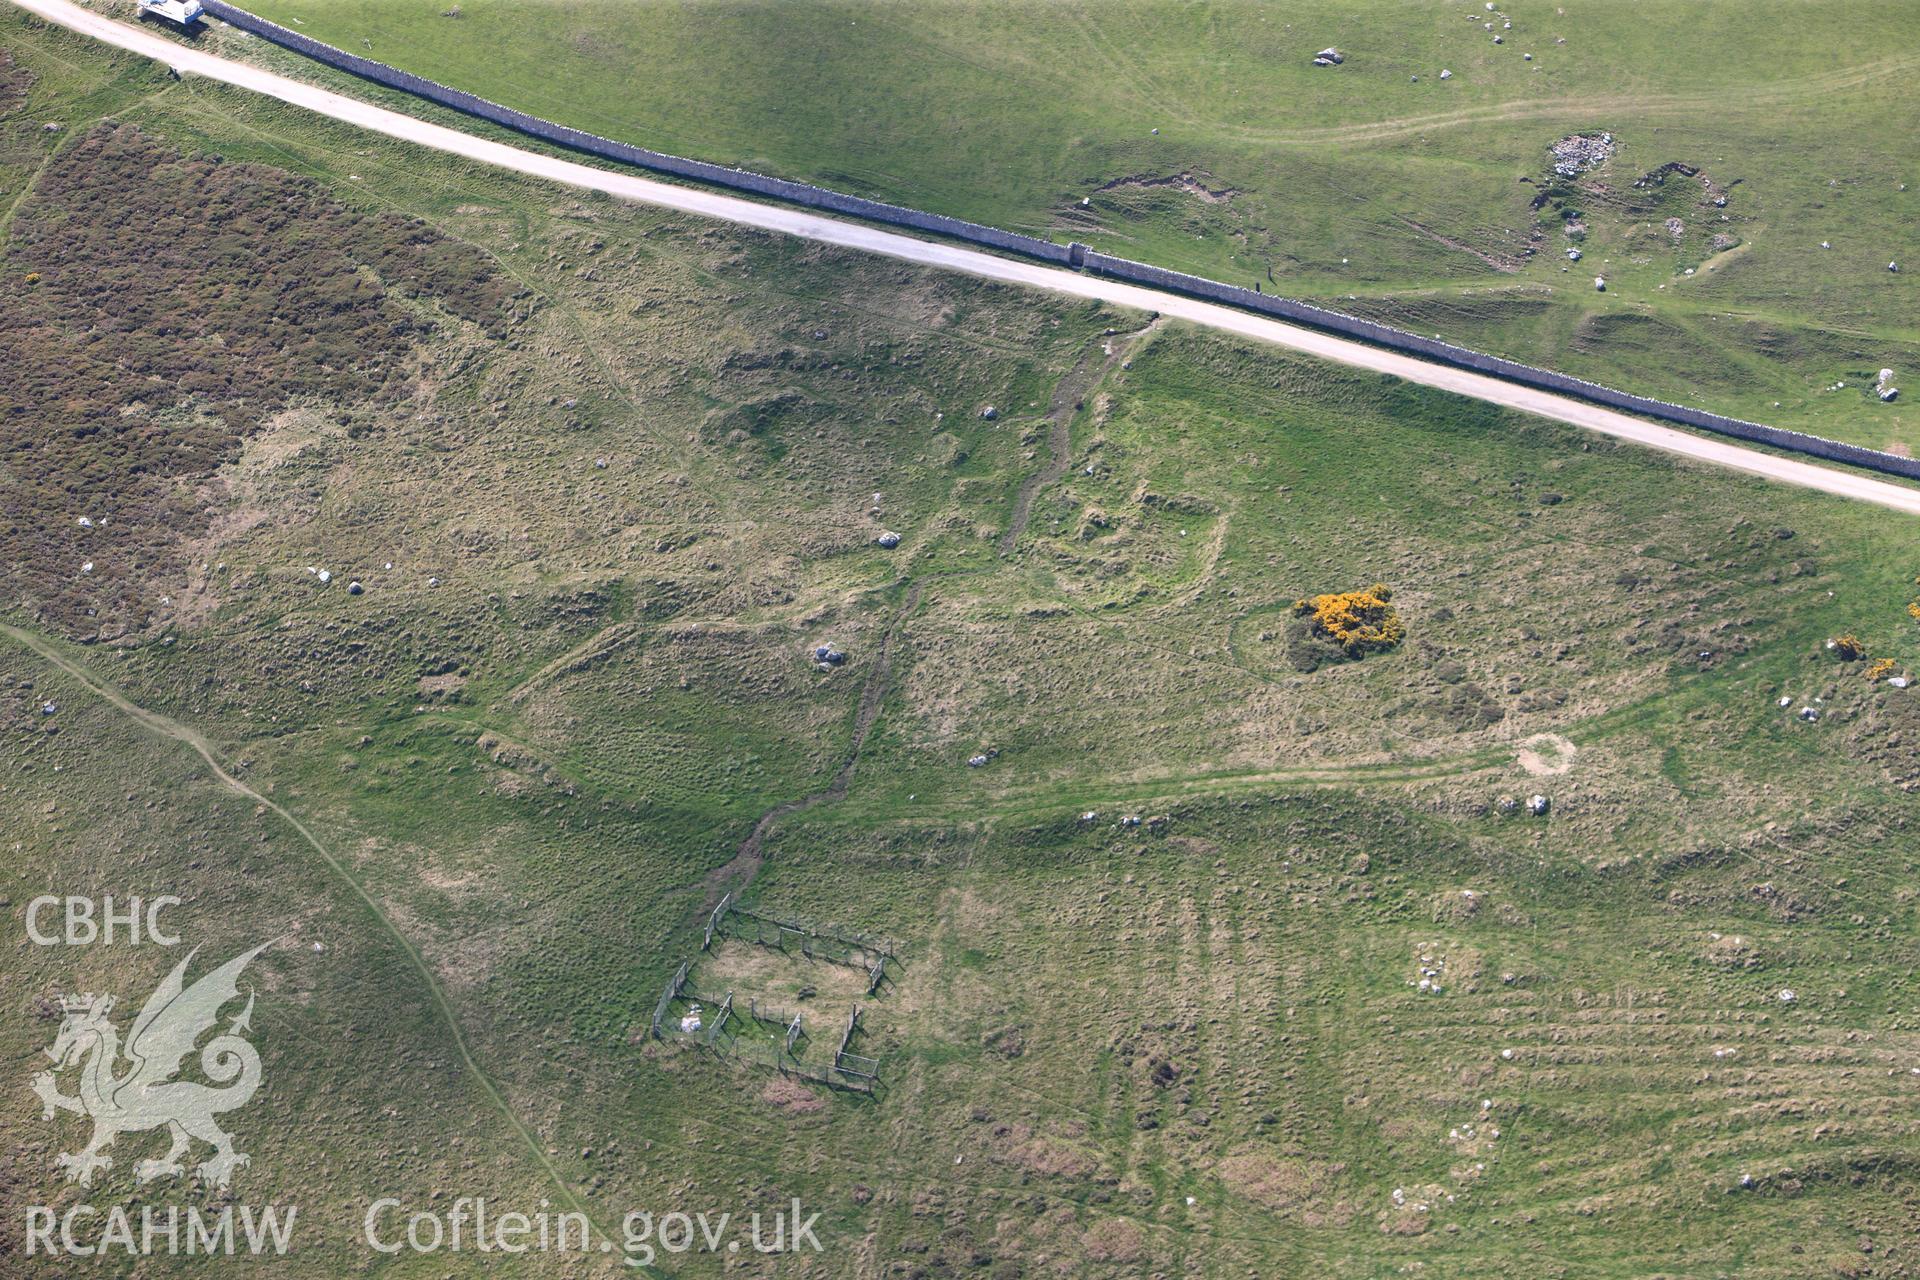 RCAHMW colour oblique photograph of Hwylfa'r Ceirw Deserted Rural Settlement. Taken by Toby Driver on 03/05/2011.